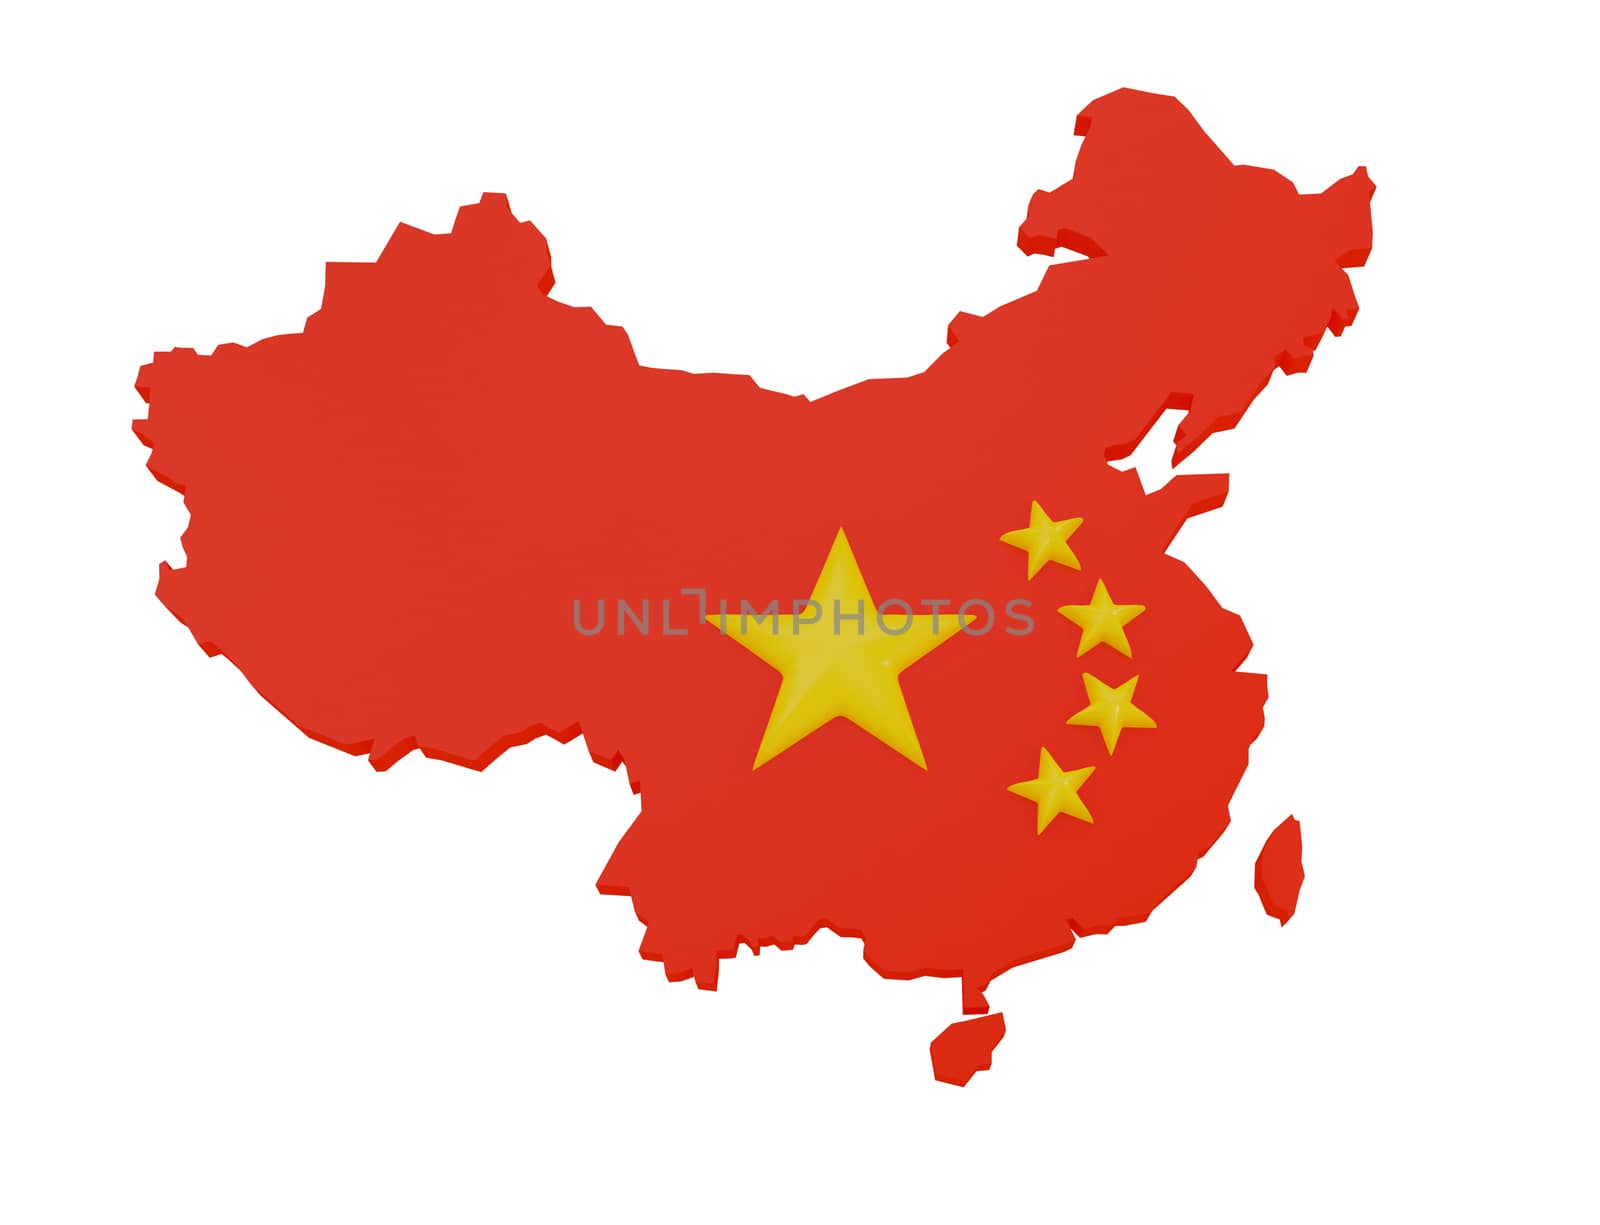 Flag of China inside the shape of the map of China by HD_premium_shots